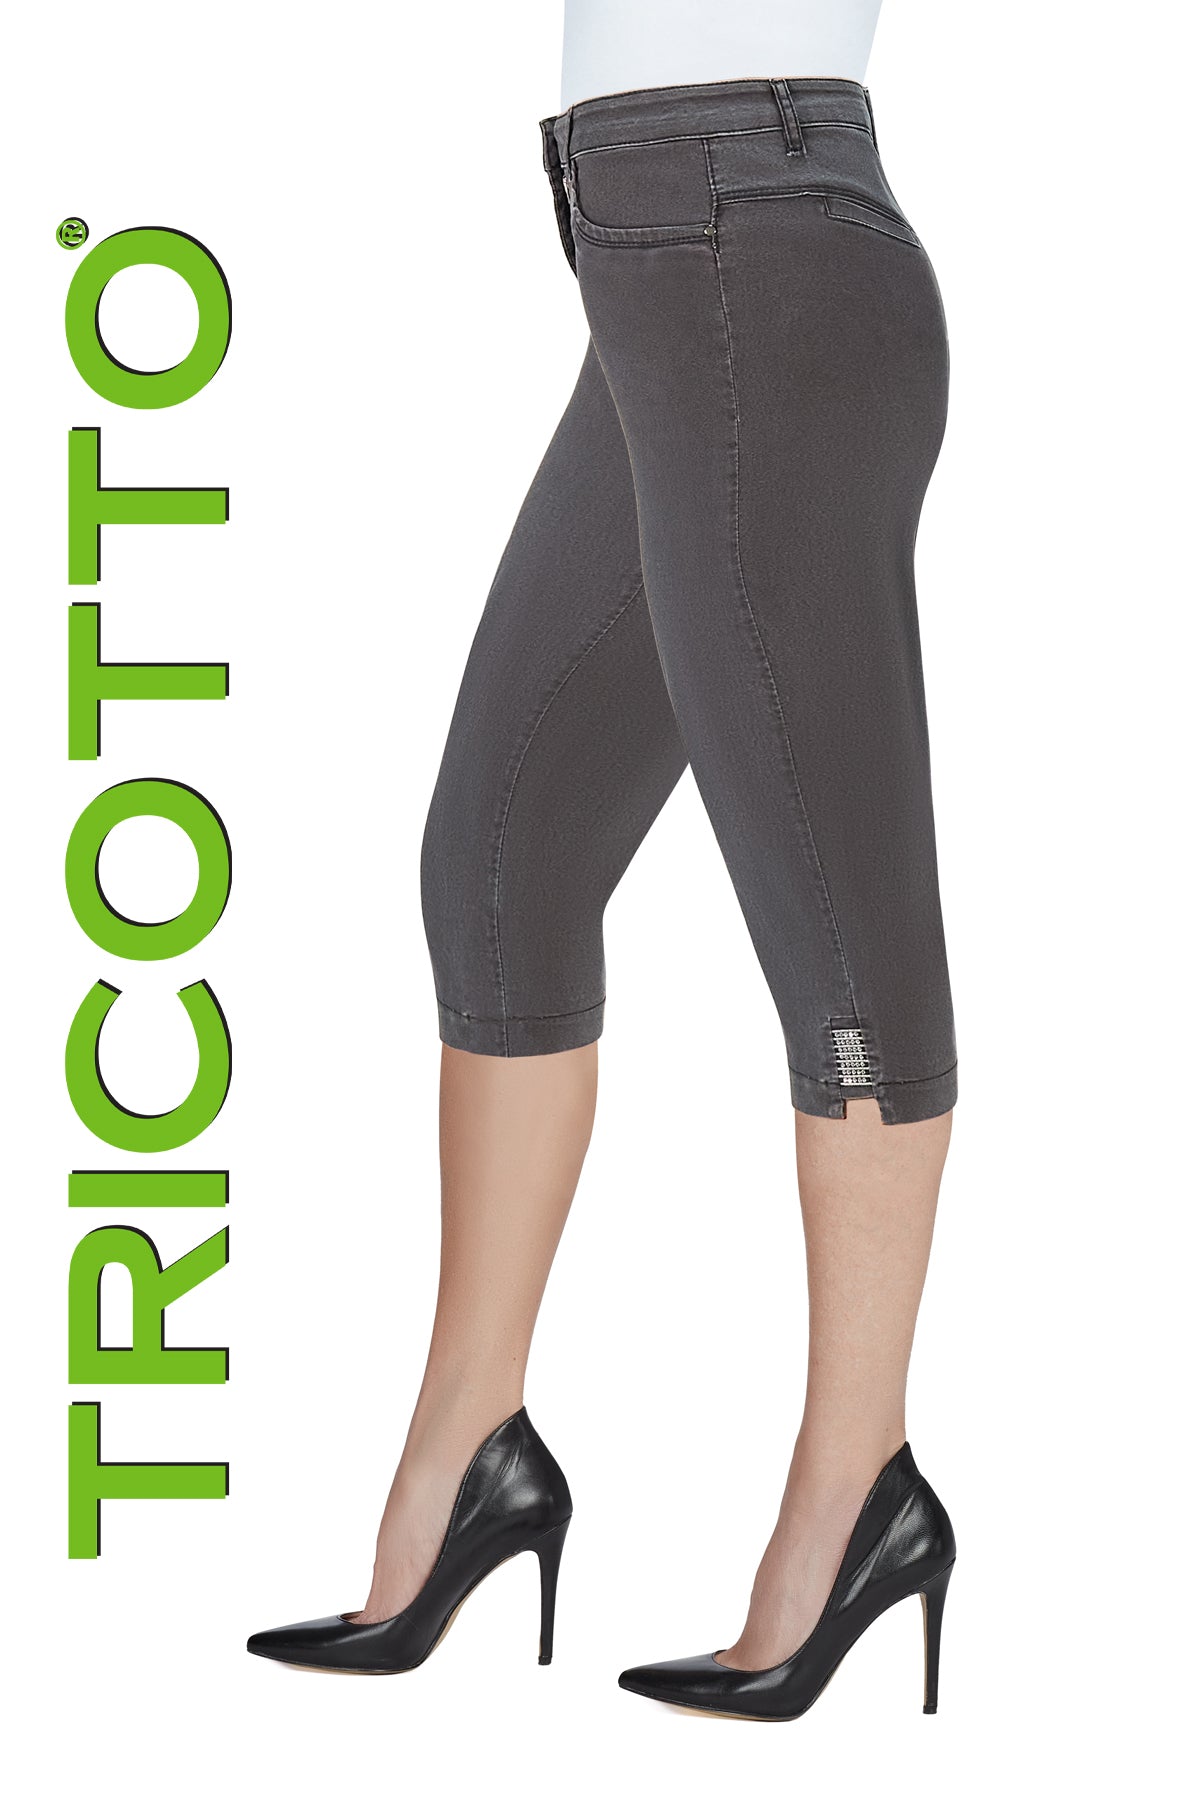 Tricotto Black Capris with zipper front and sequin hem detail